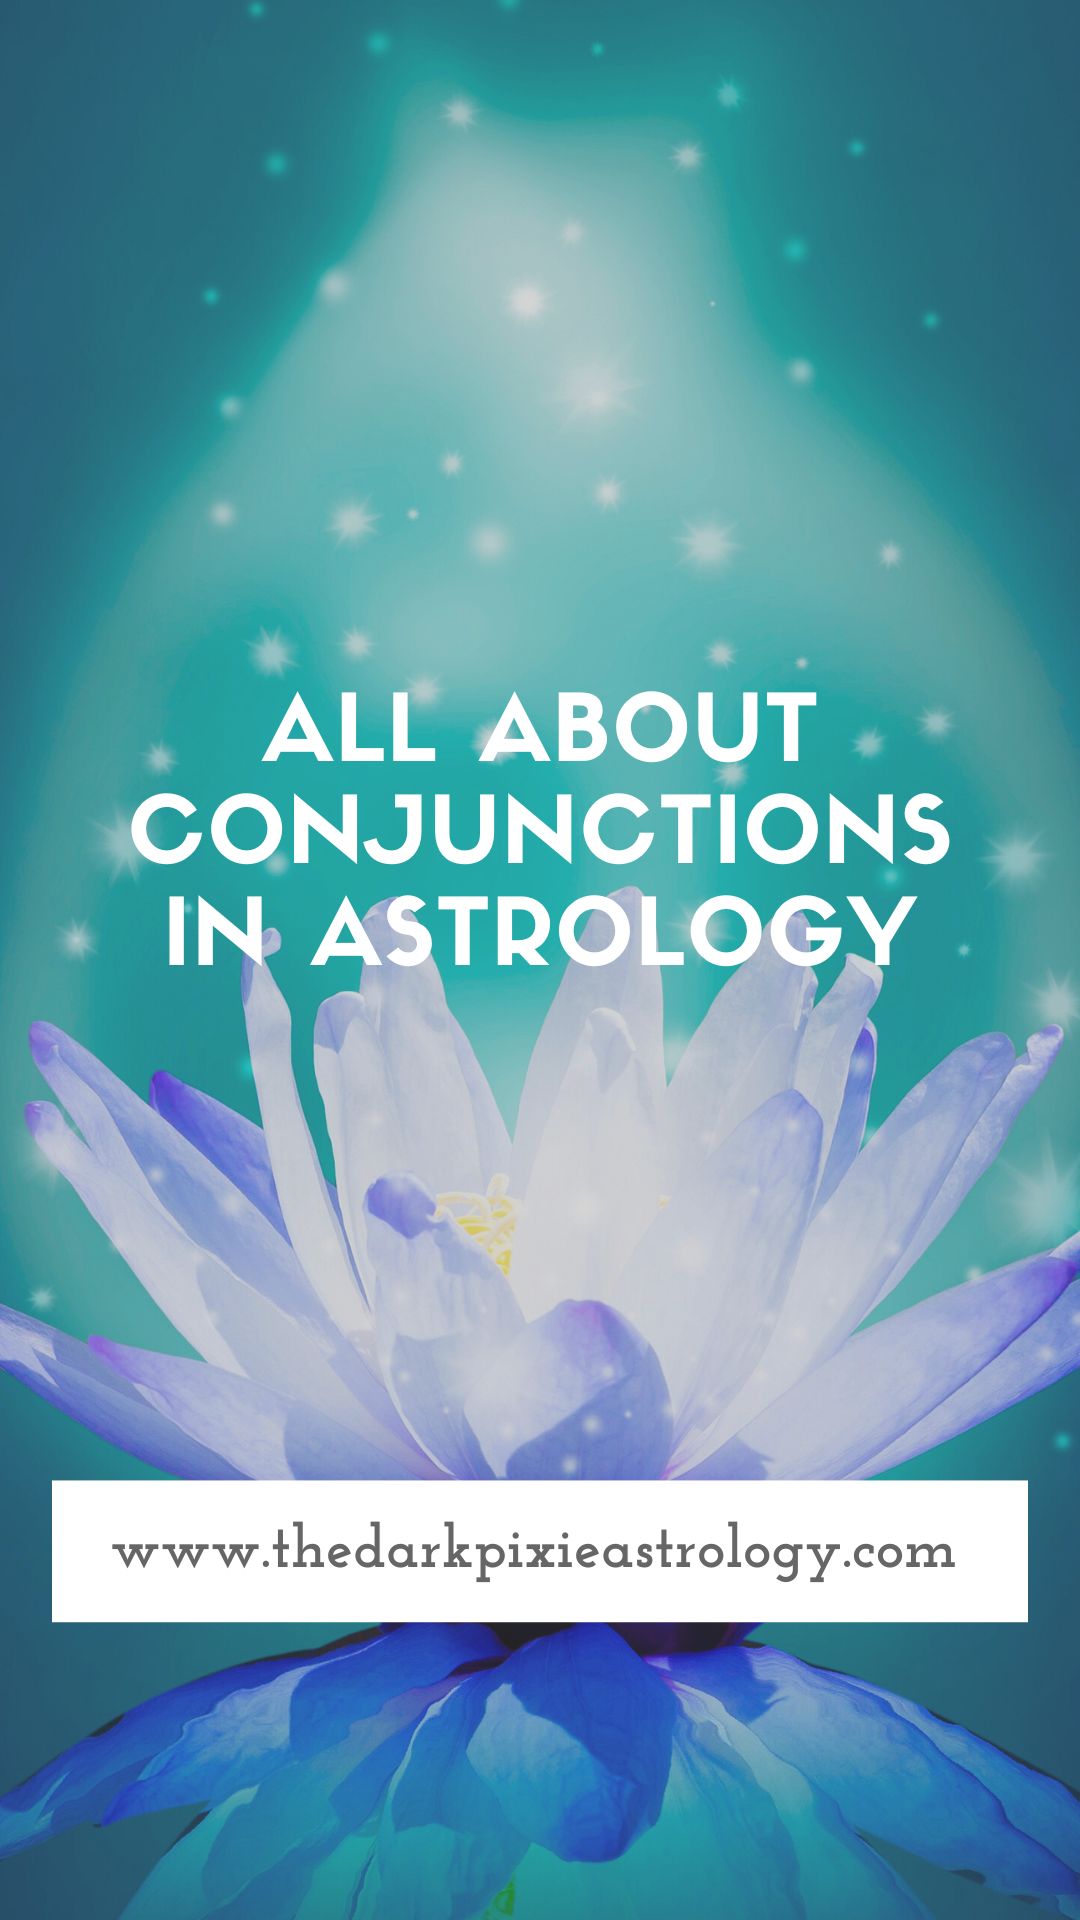 All About Conjunctions in Astrology - The Dark Pixie Astrology